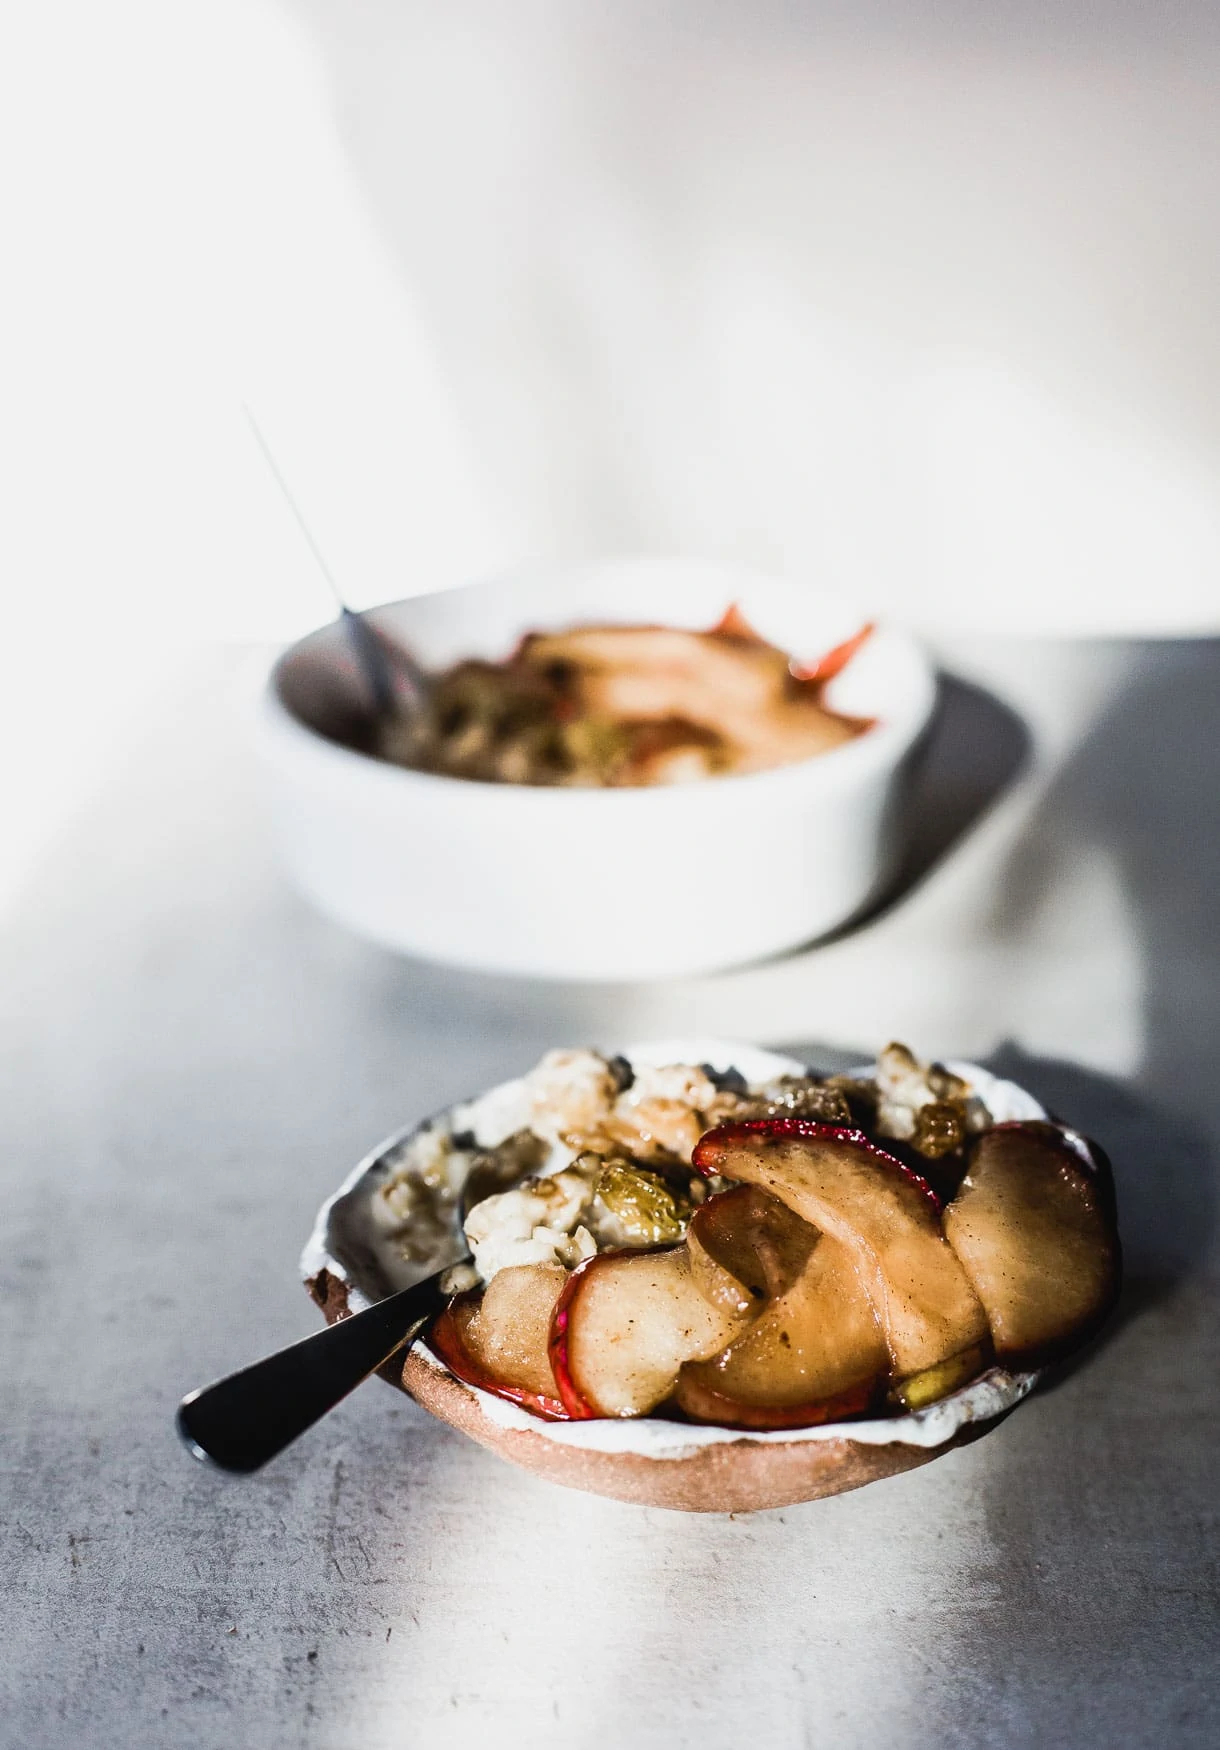 Coconut Sugar Oatmeal with Caramelized Apples